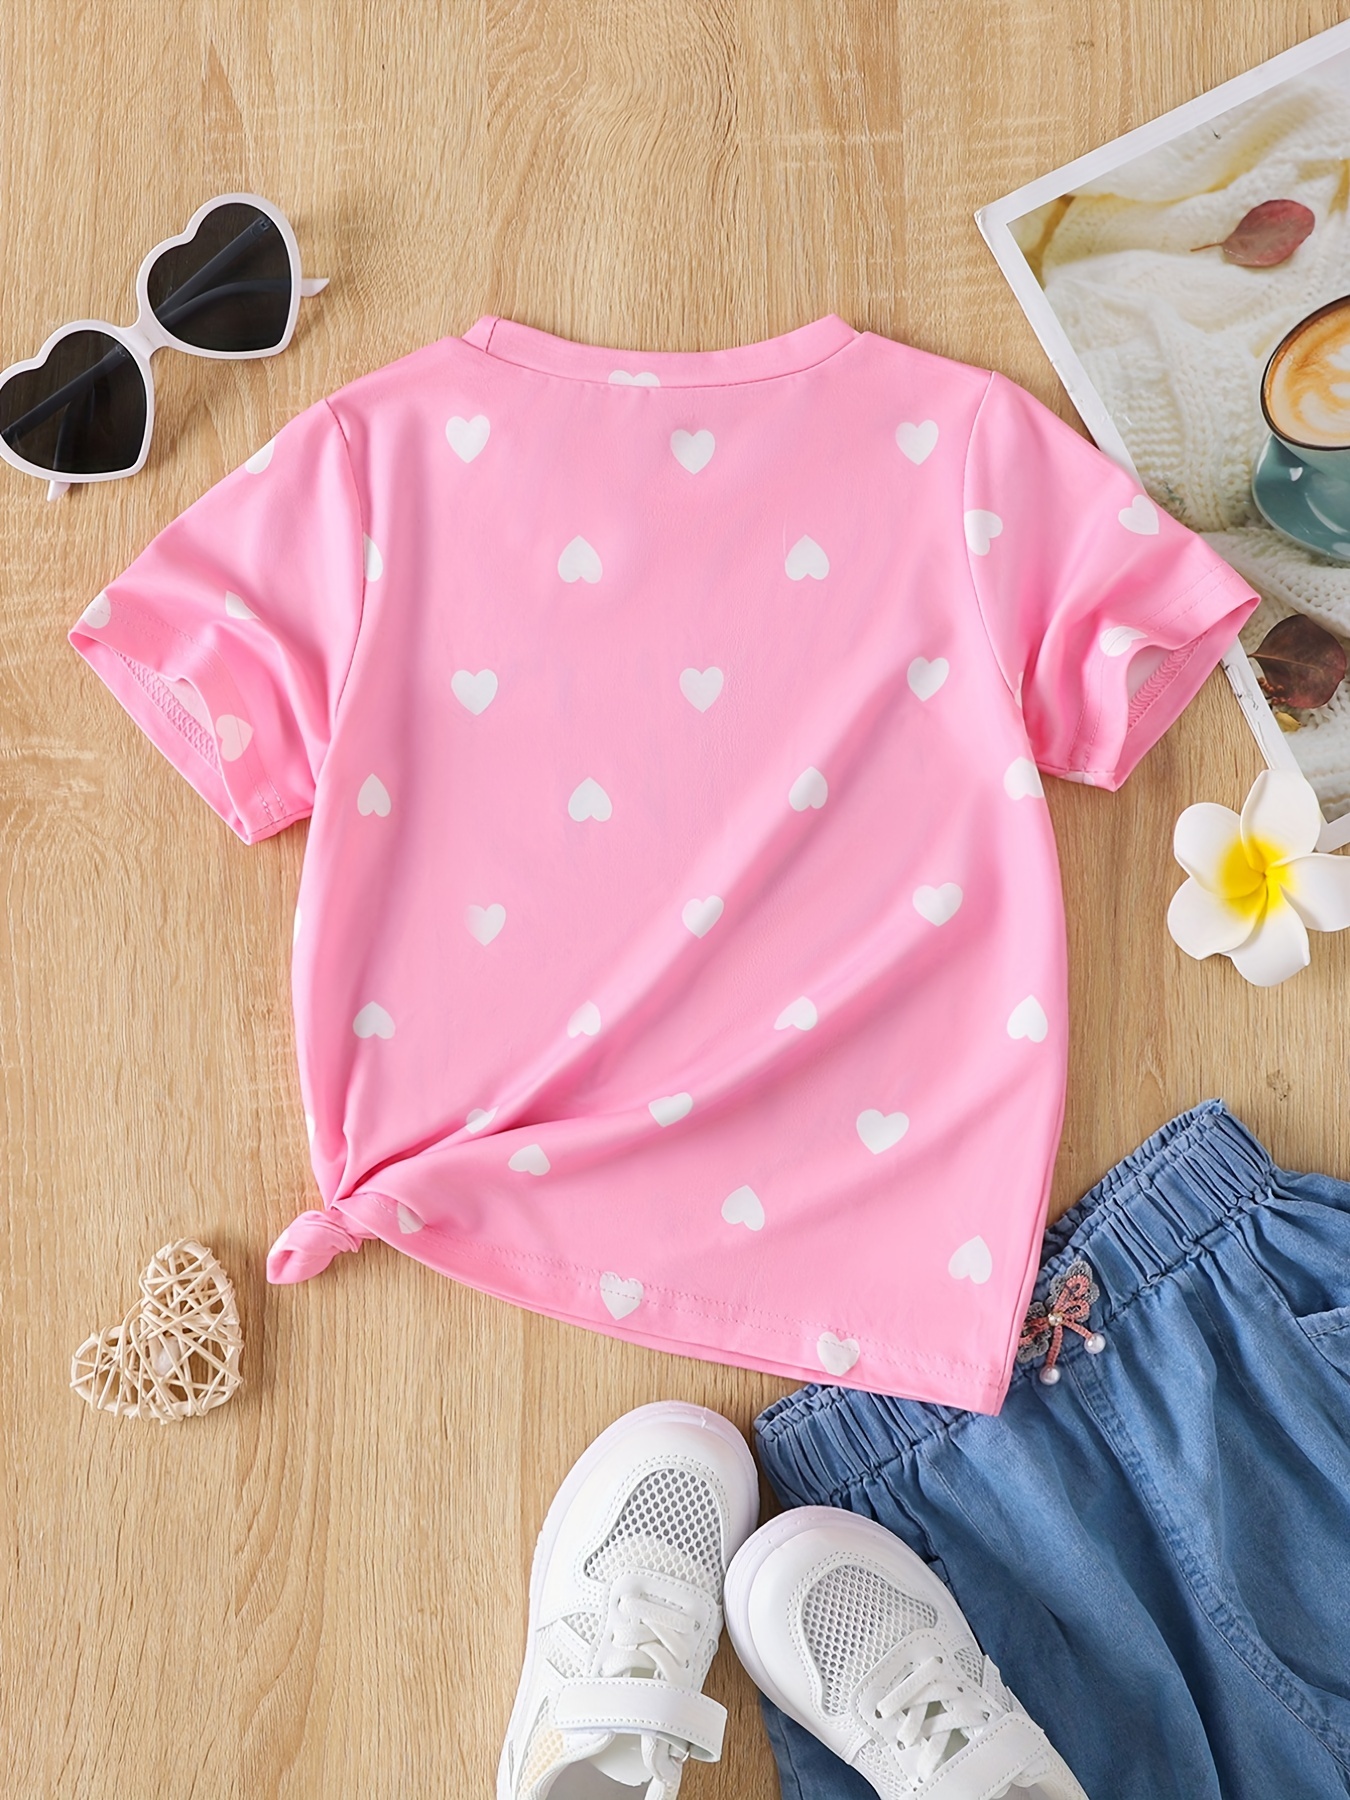 Where To Buy Cute & Unique Baby Girl Clothes - Coffee With Summer